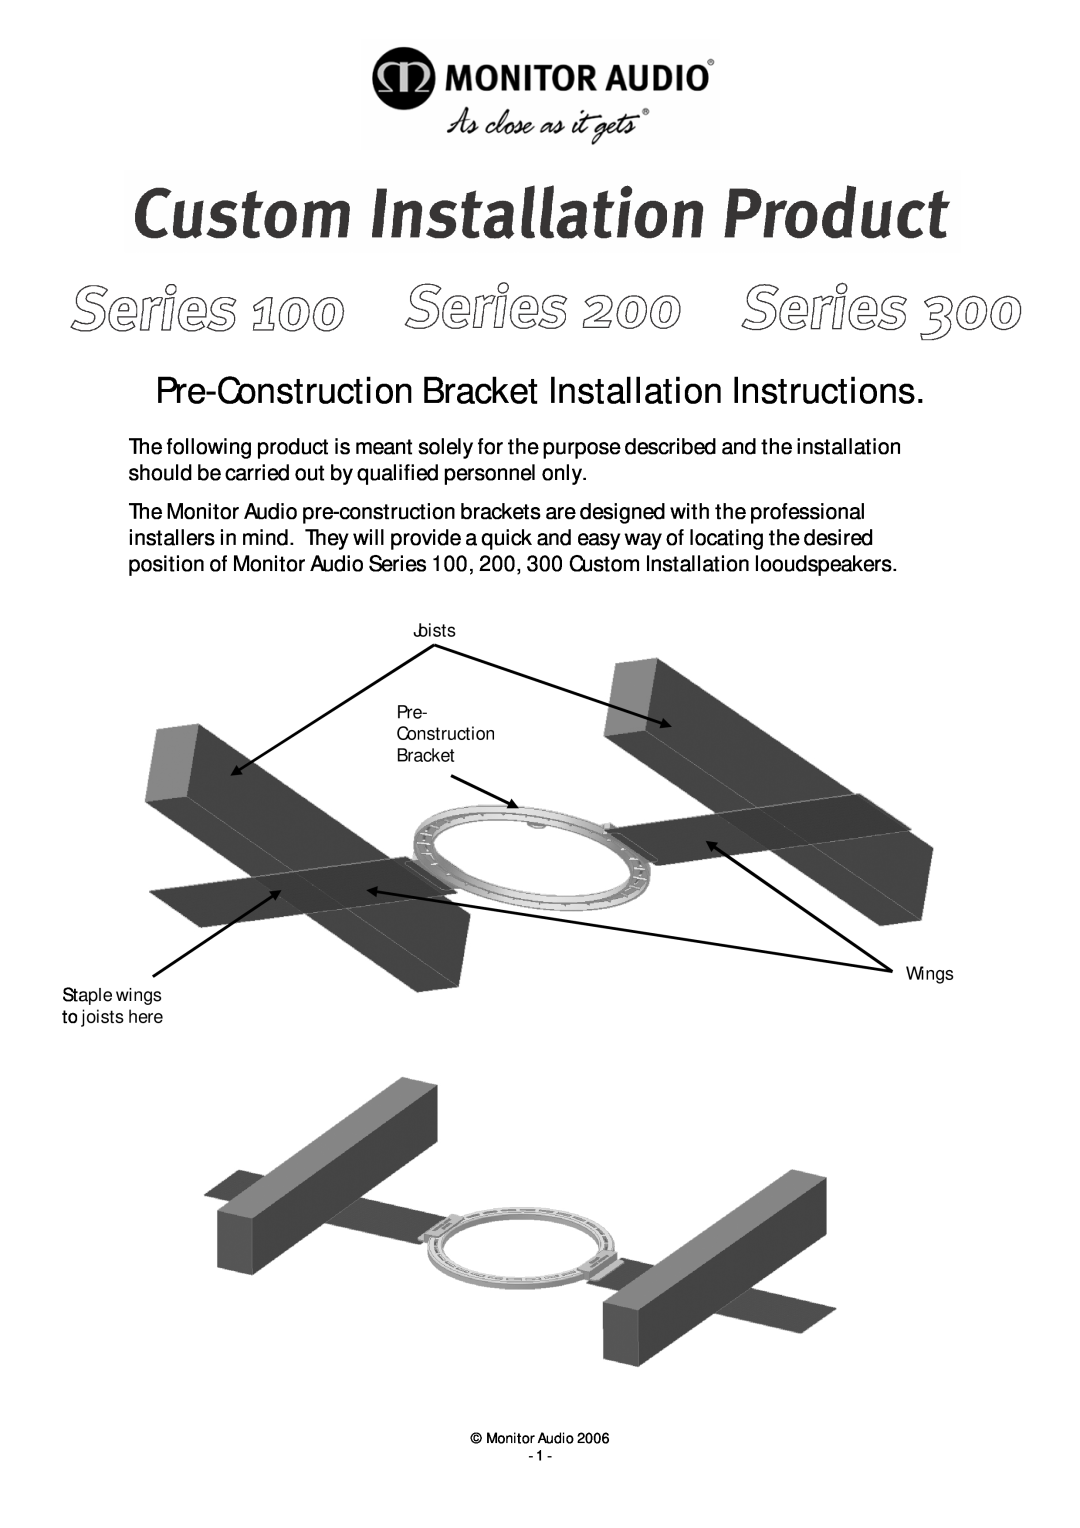 Monitor Audio 300 installation instructions Pre-ConstructionBracket Installation Instructions, Staple wings to joists here 